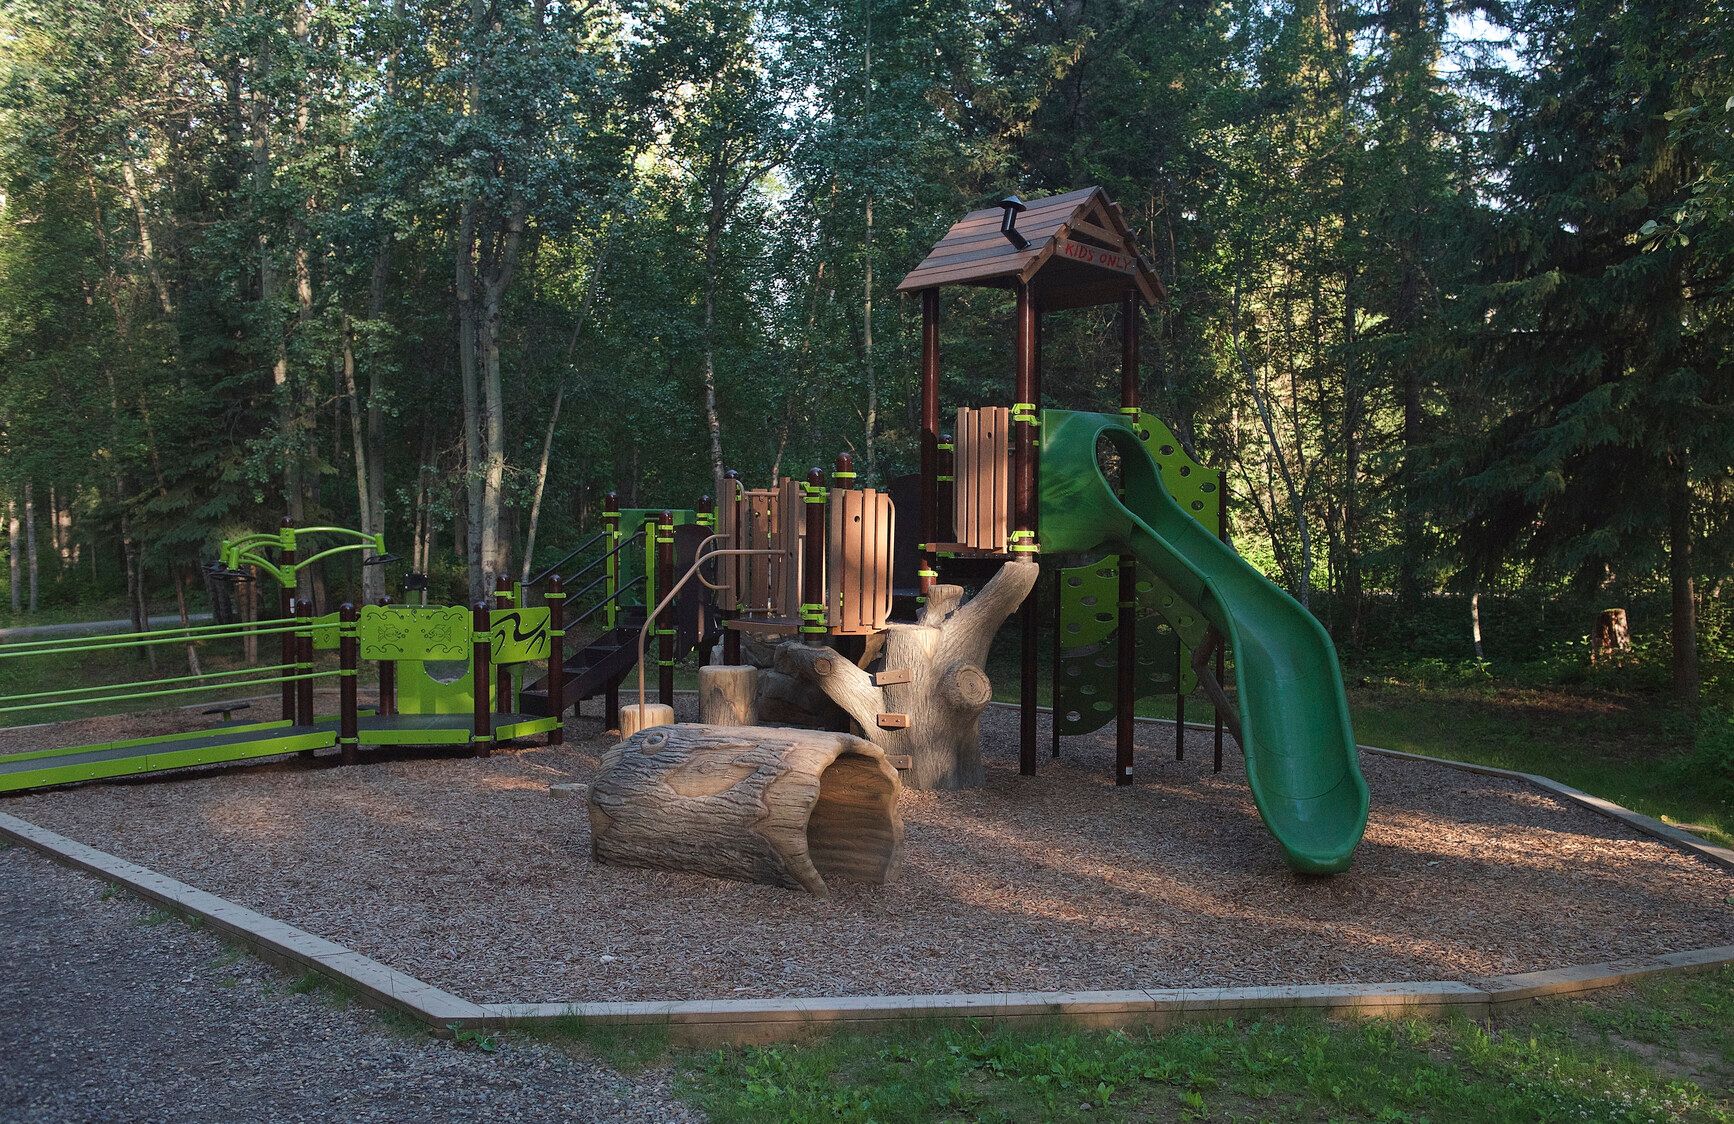 The playground facility in Liard River Hot Springs Park.